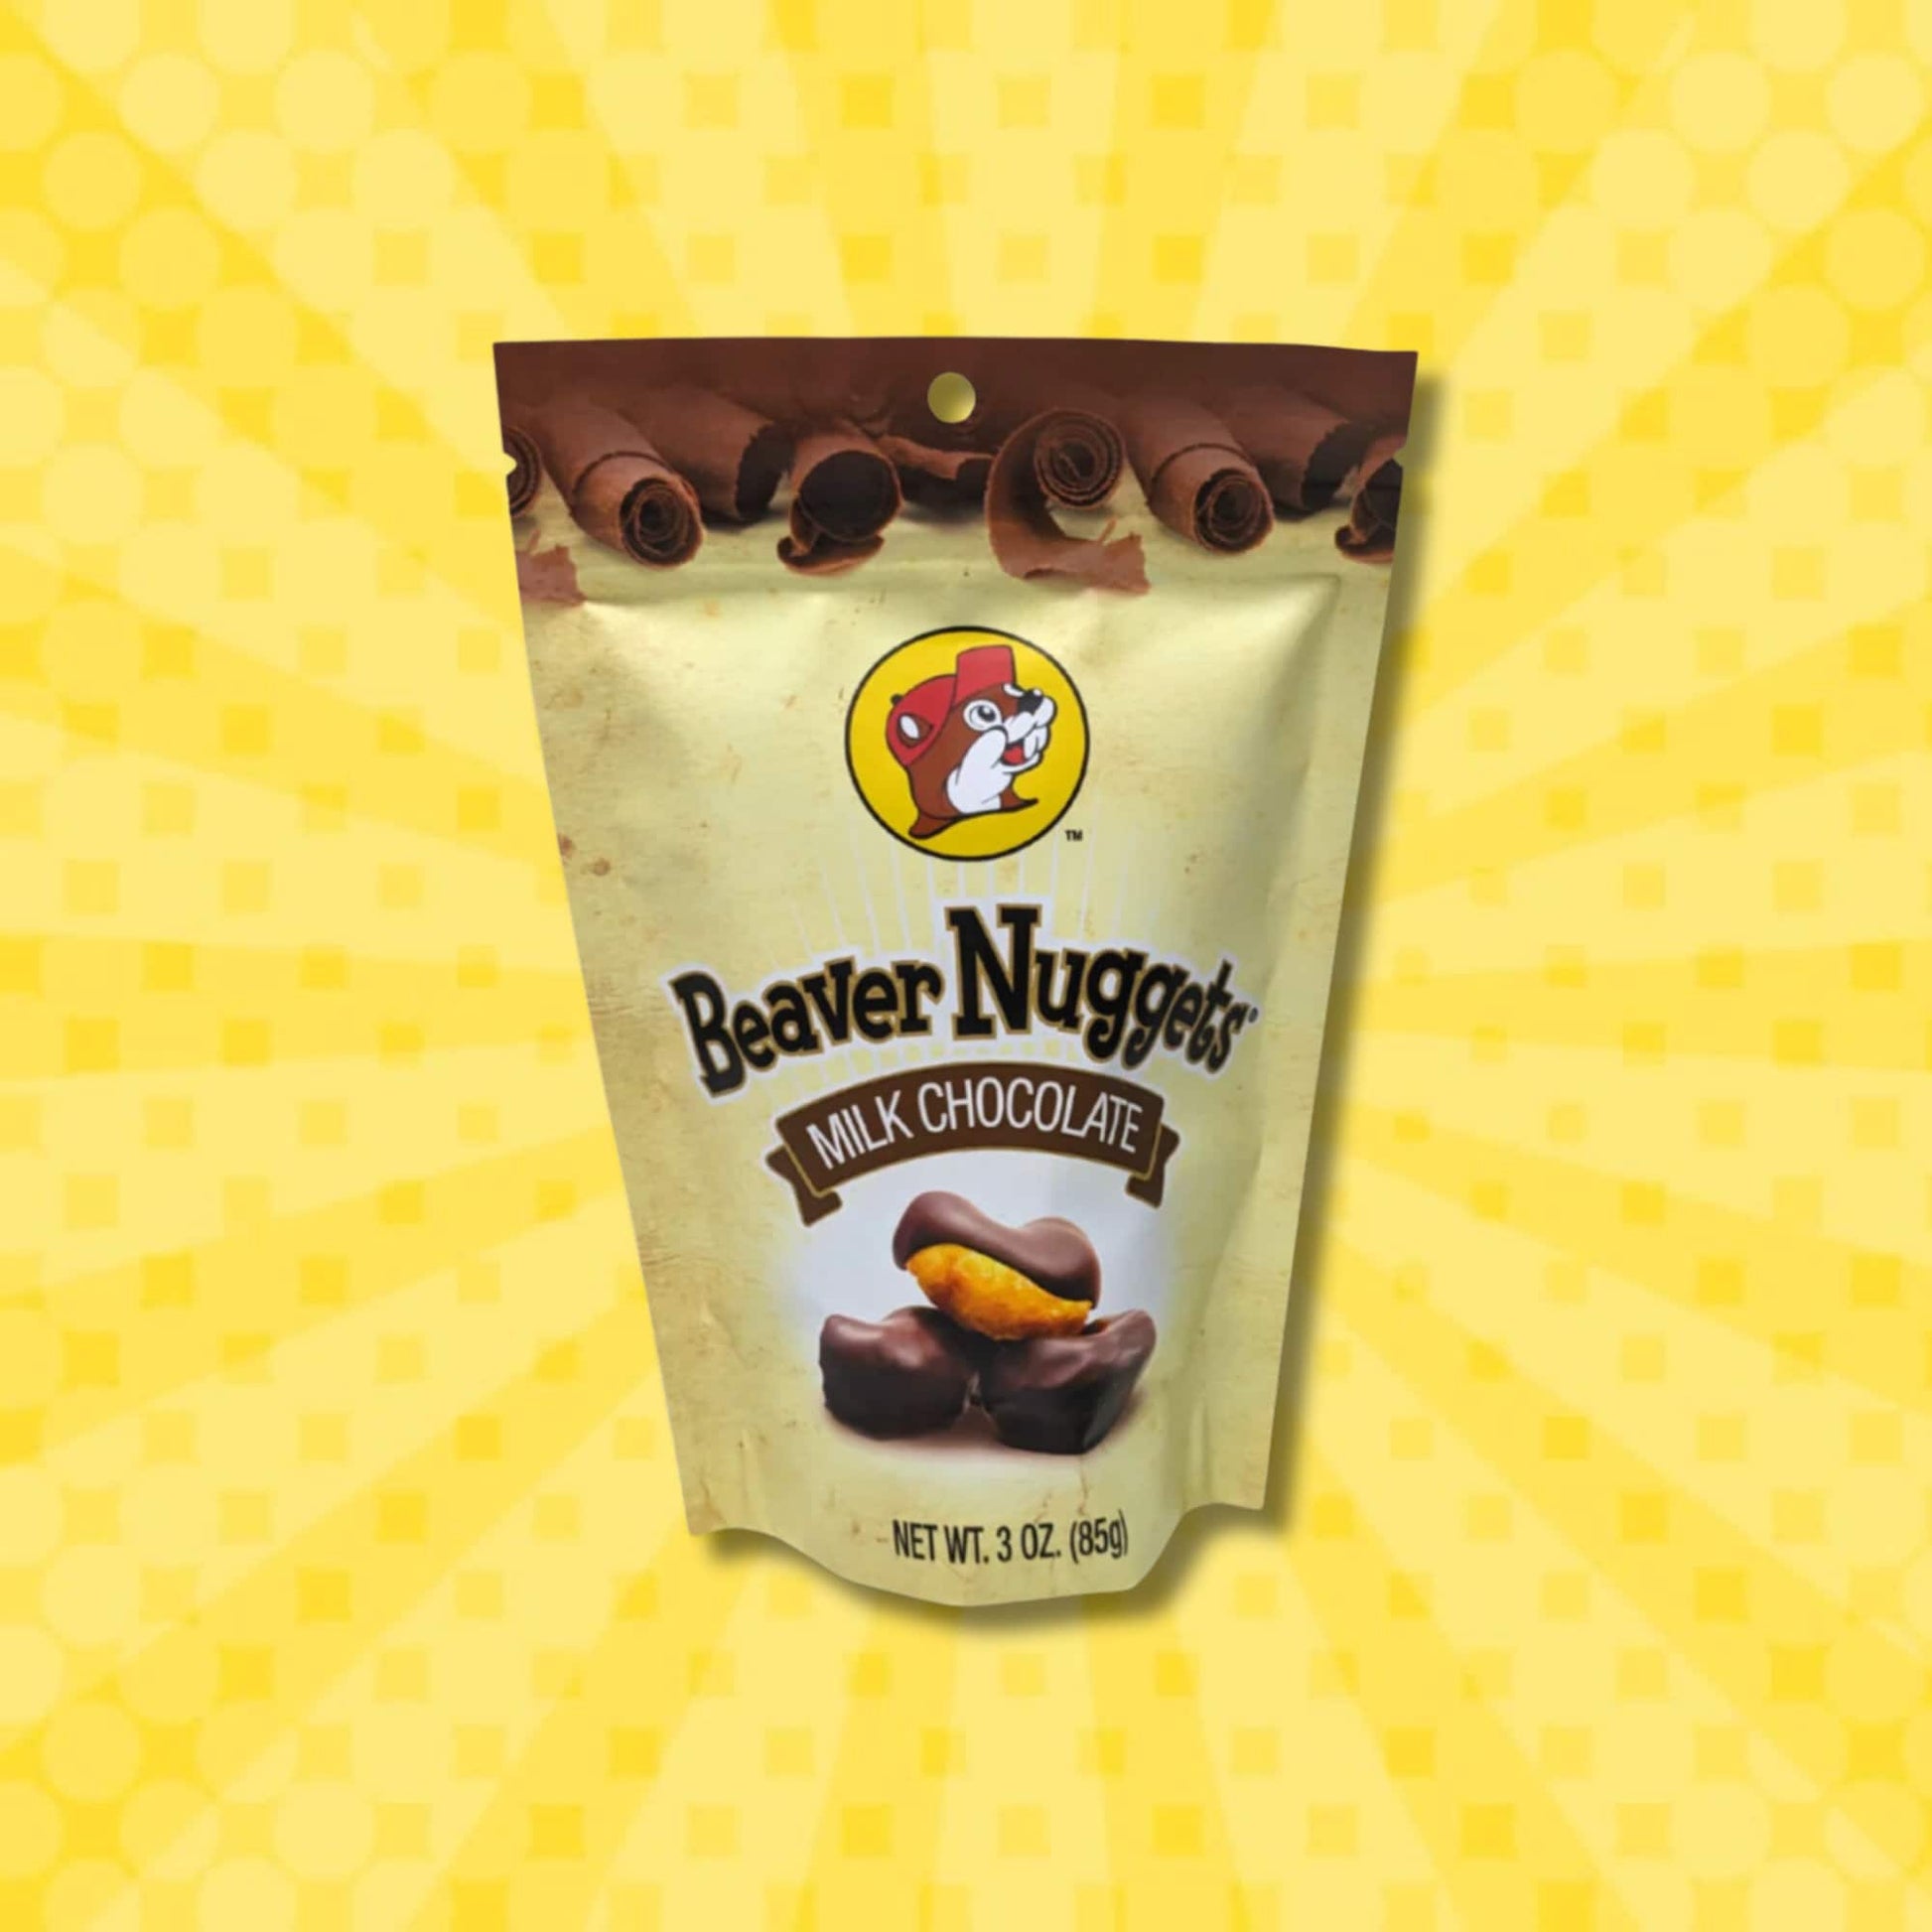 Buc-ee's Chocolate Covered Beaver Nuggets (Milk Chocolate flavor pictured)